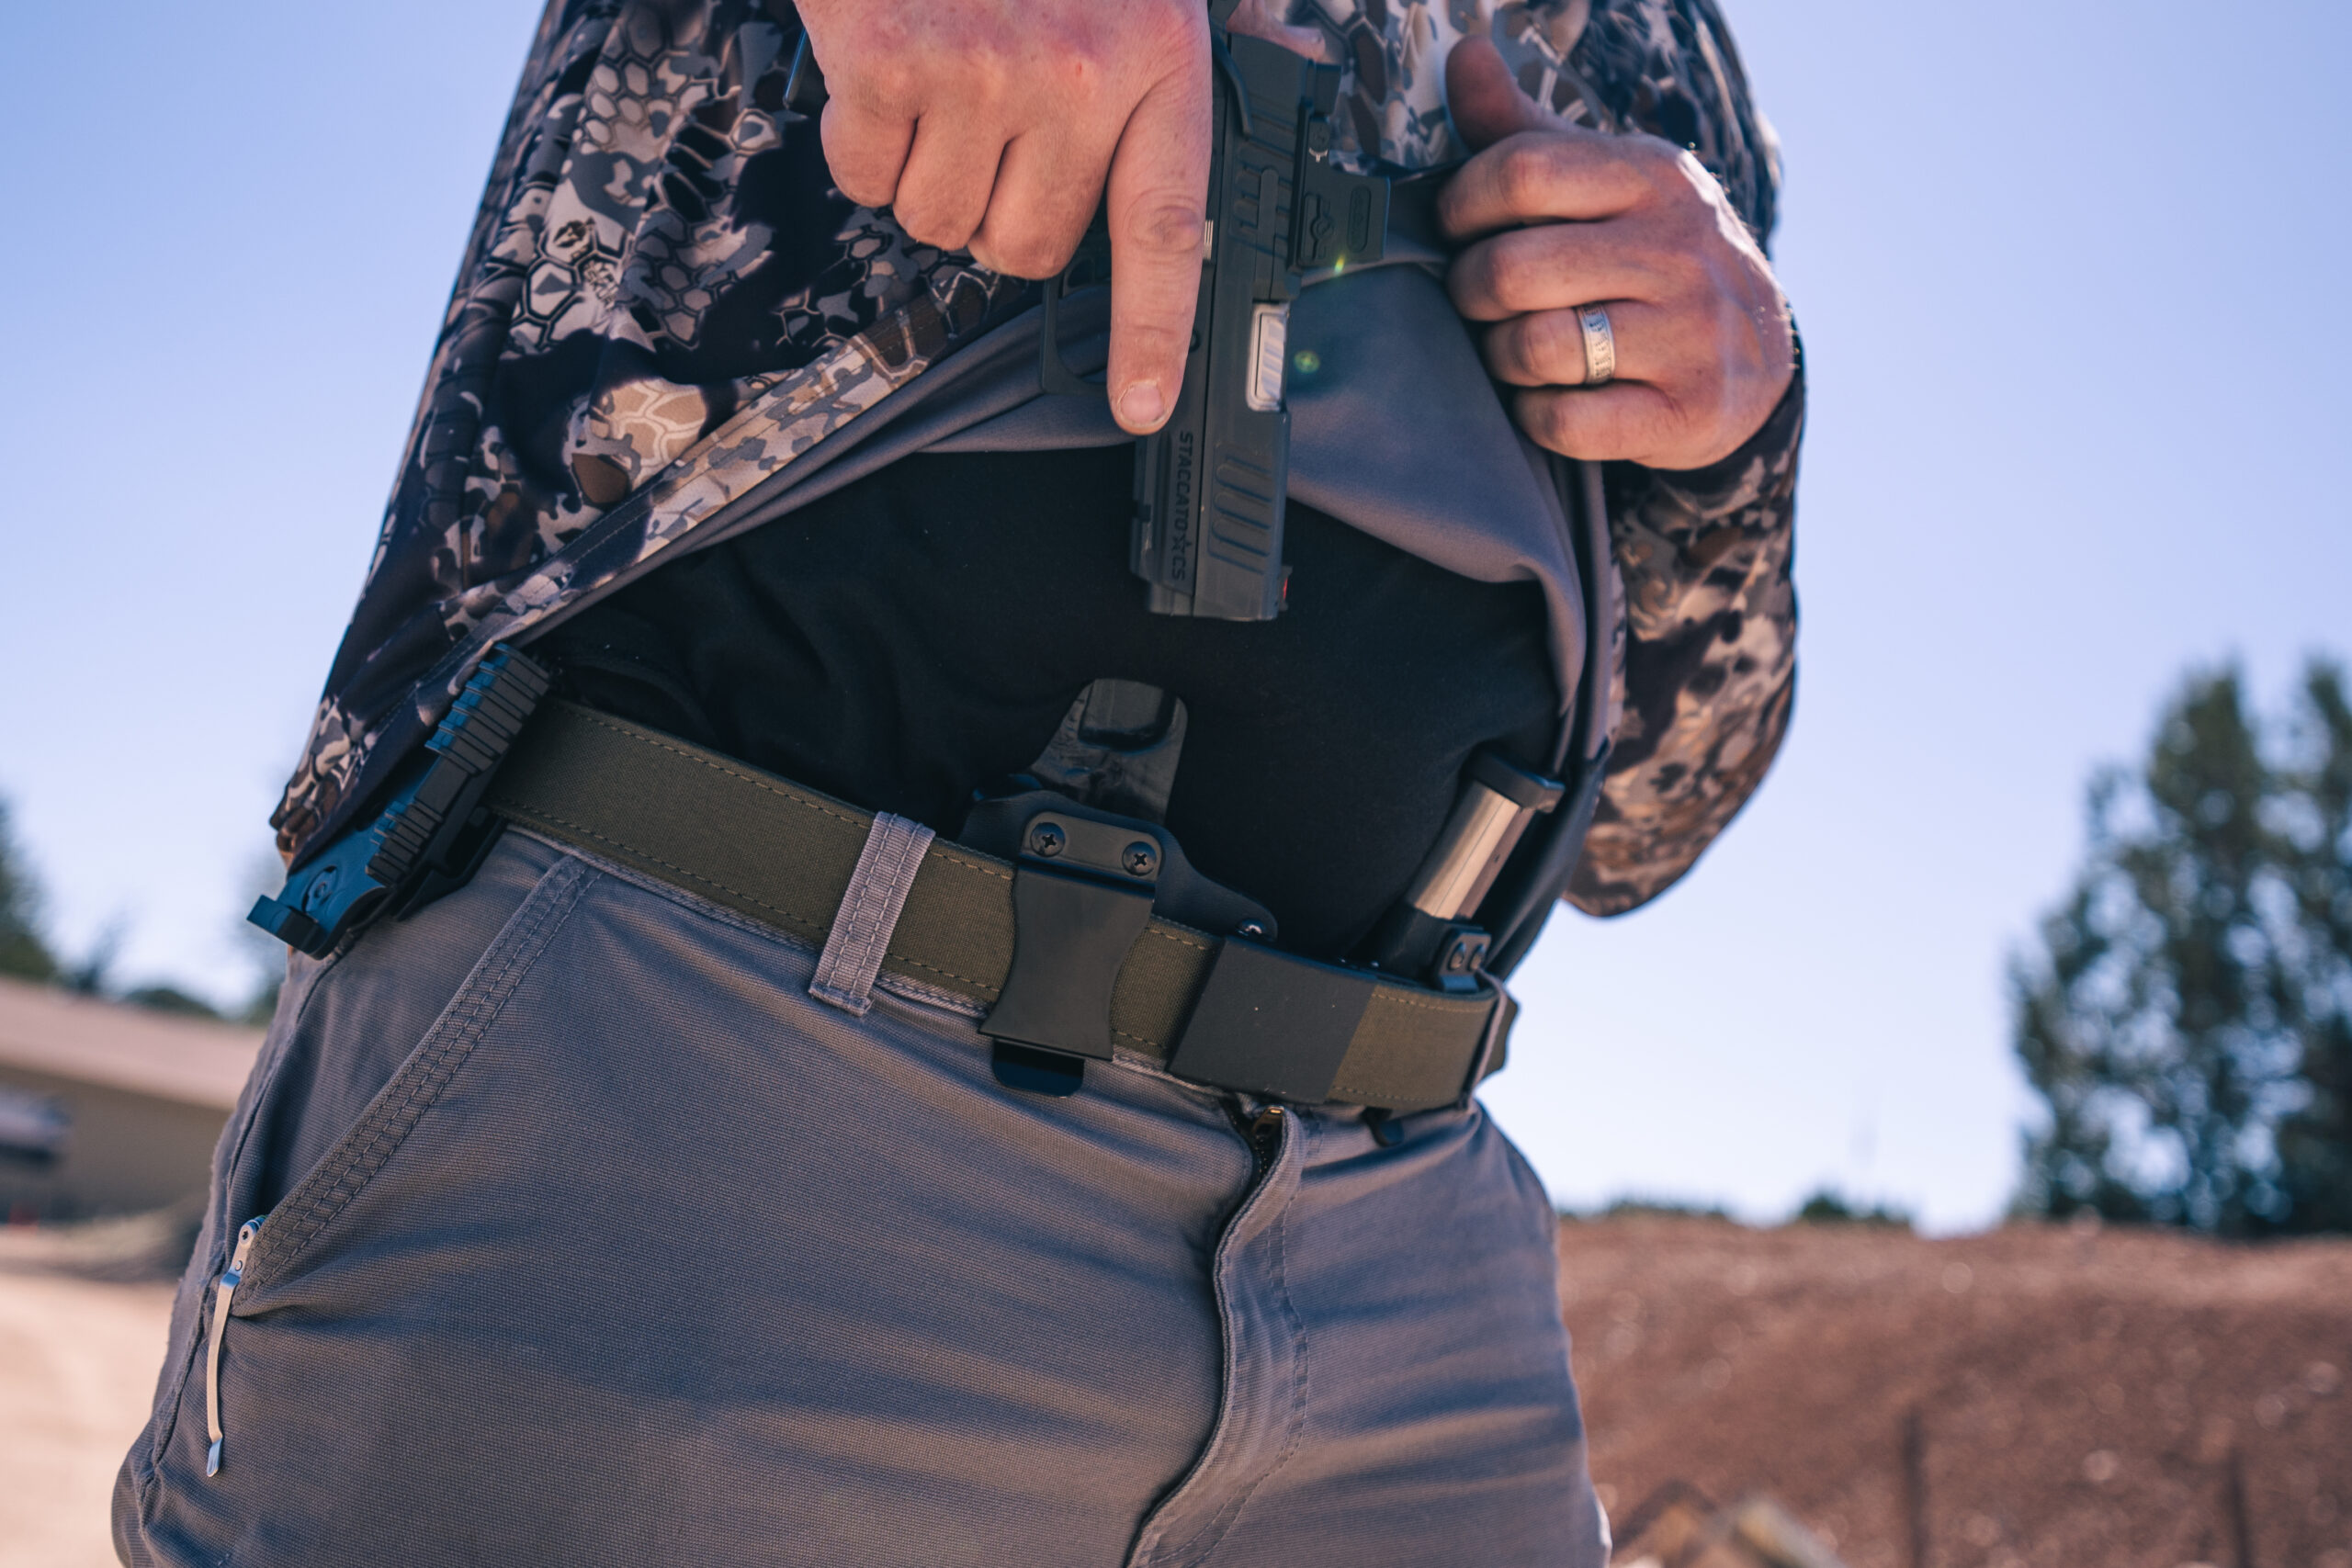 Concealment Express Concealed Carry Leggings - CCW Carry Leggings